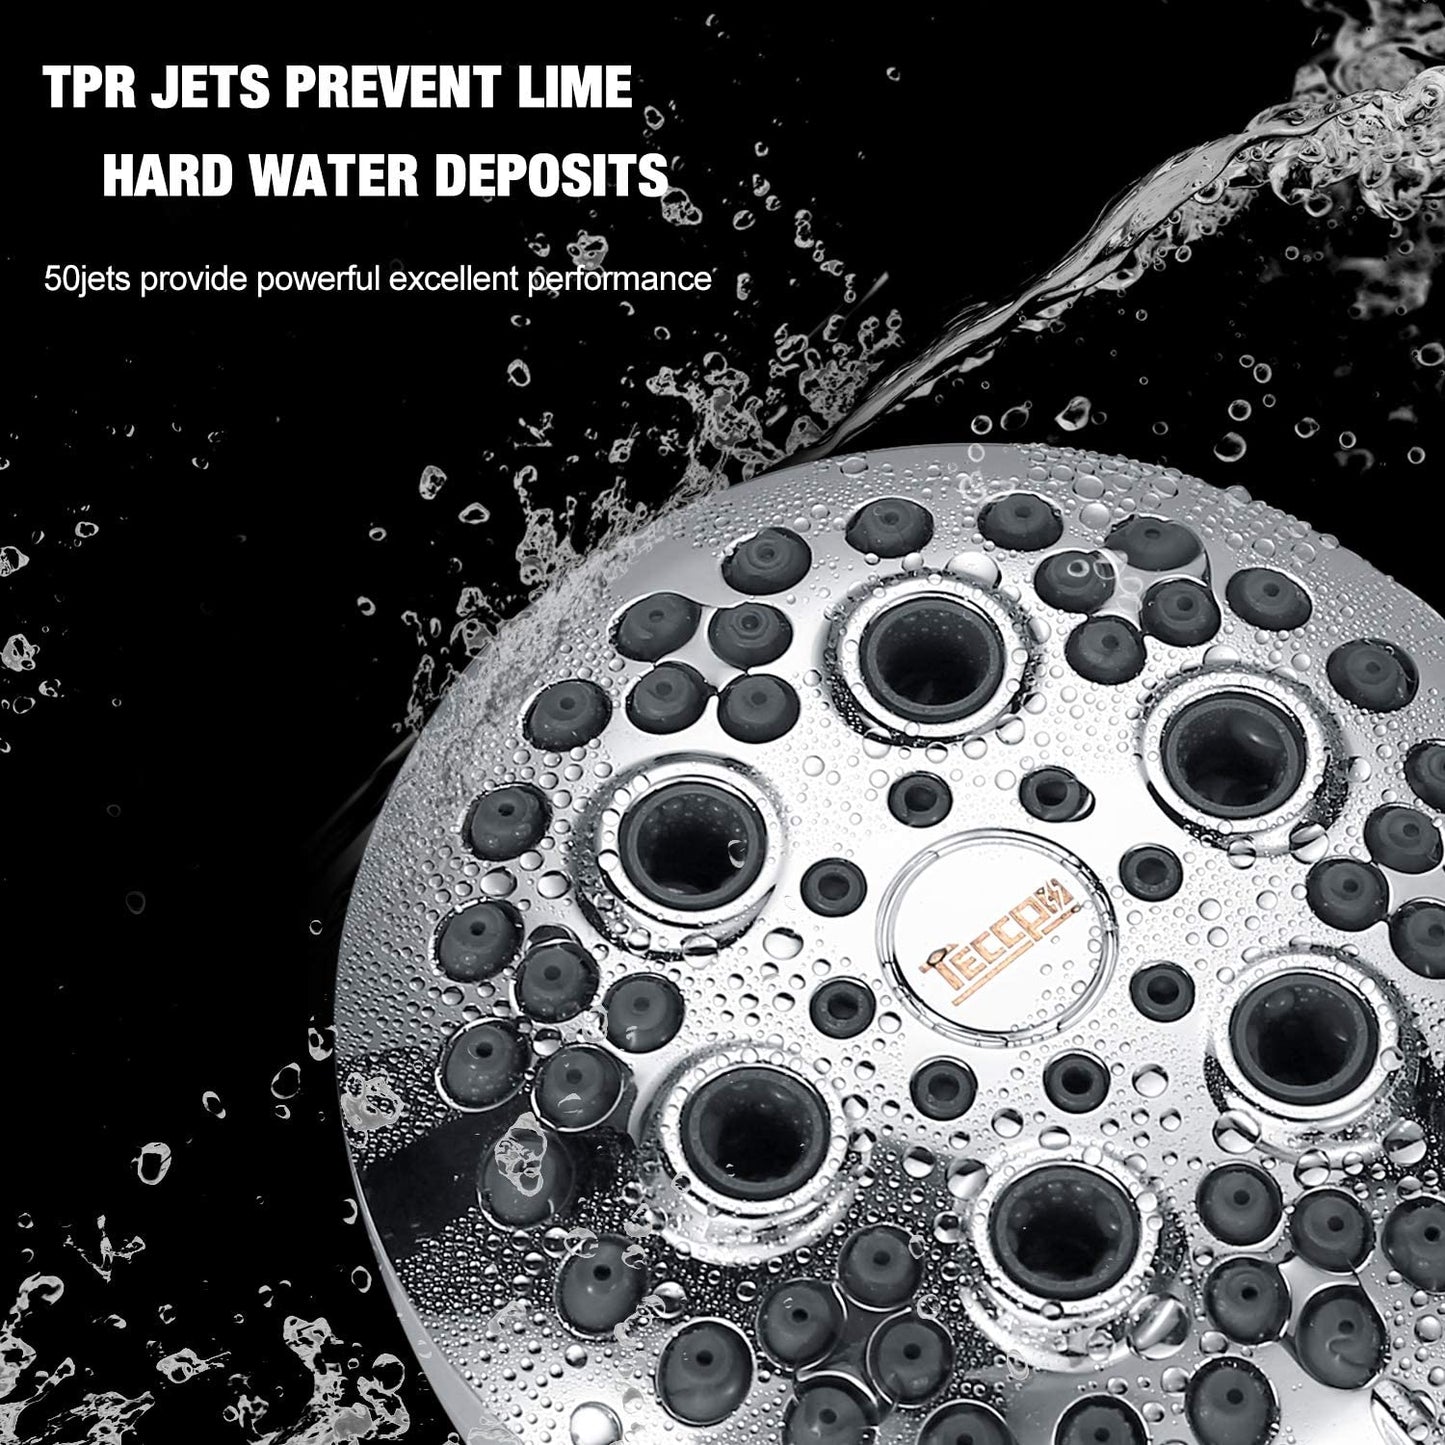 Shower Head, TECCPO 3.5 Inch 5-Setting High Pressure Fixed Chrome Shower Head, with Massage & Self-Cleaning Function, Wall Mounted, Anti-Clog & Anti-Leak, Tool-Free 1 Min Installation